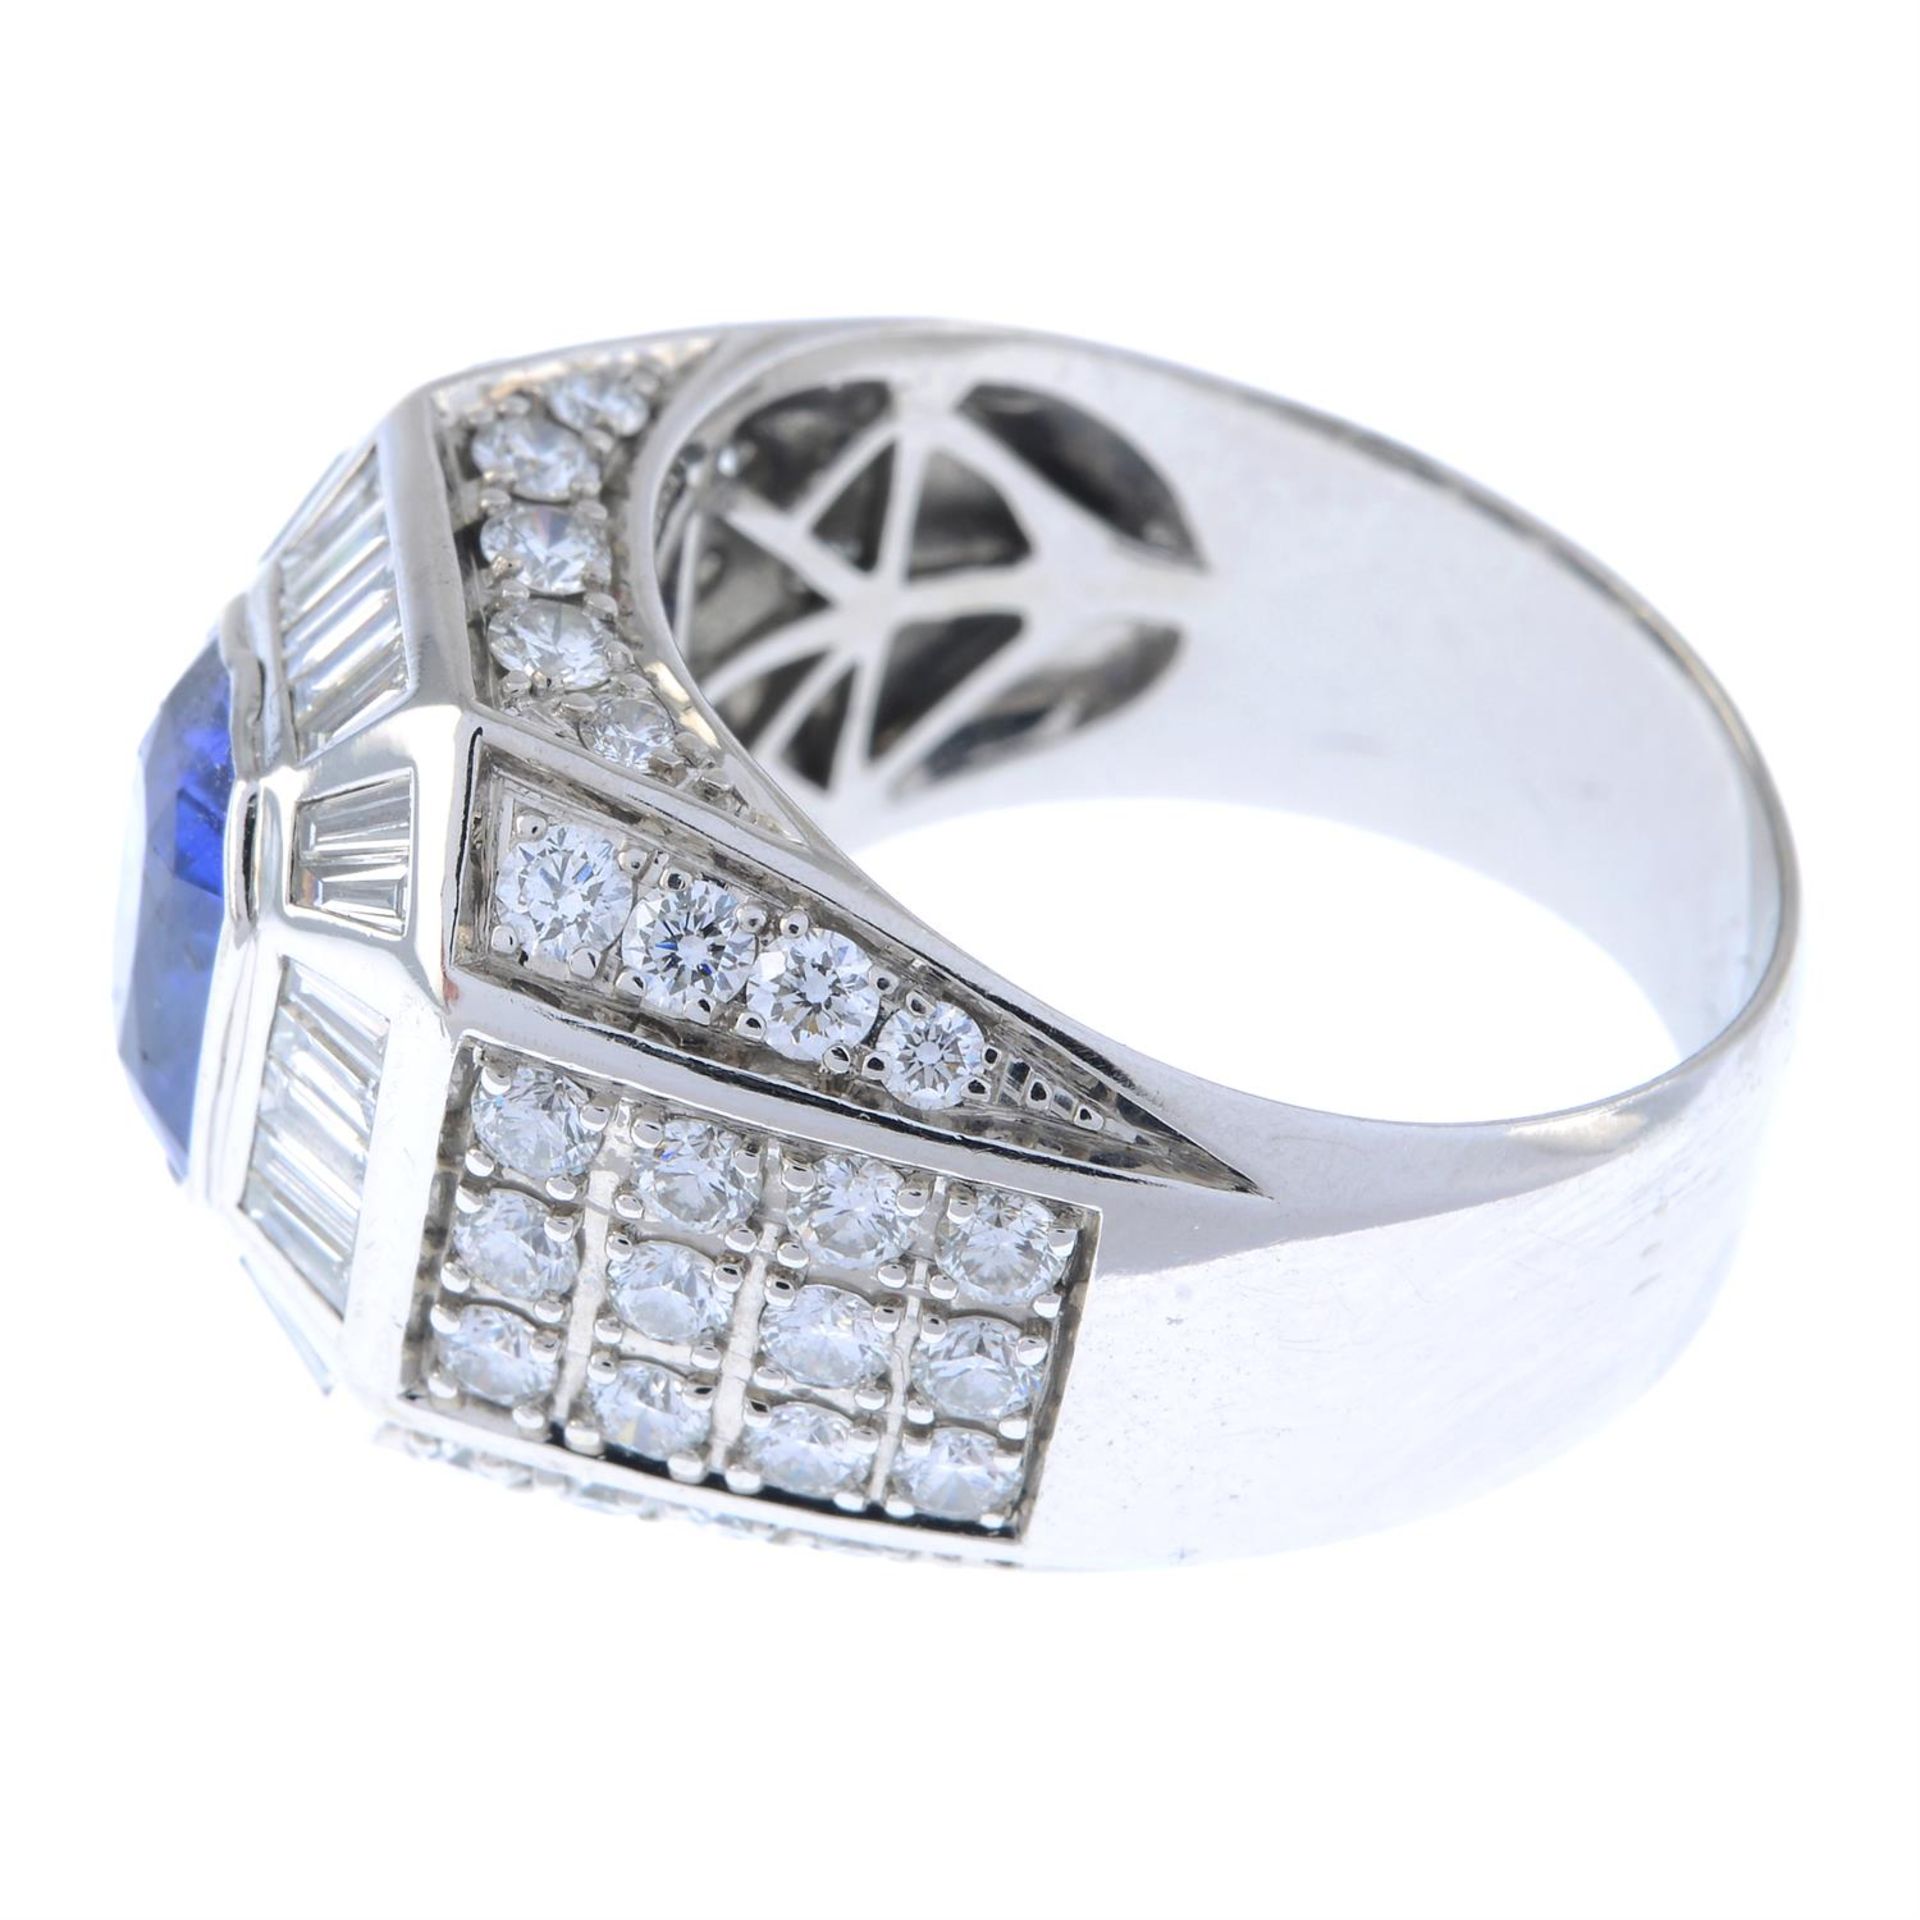 Sapphire and diamond ring - Image 3 of 4